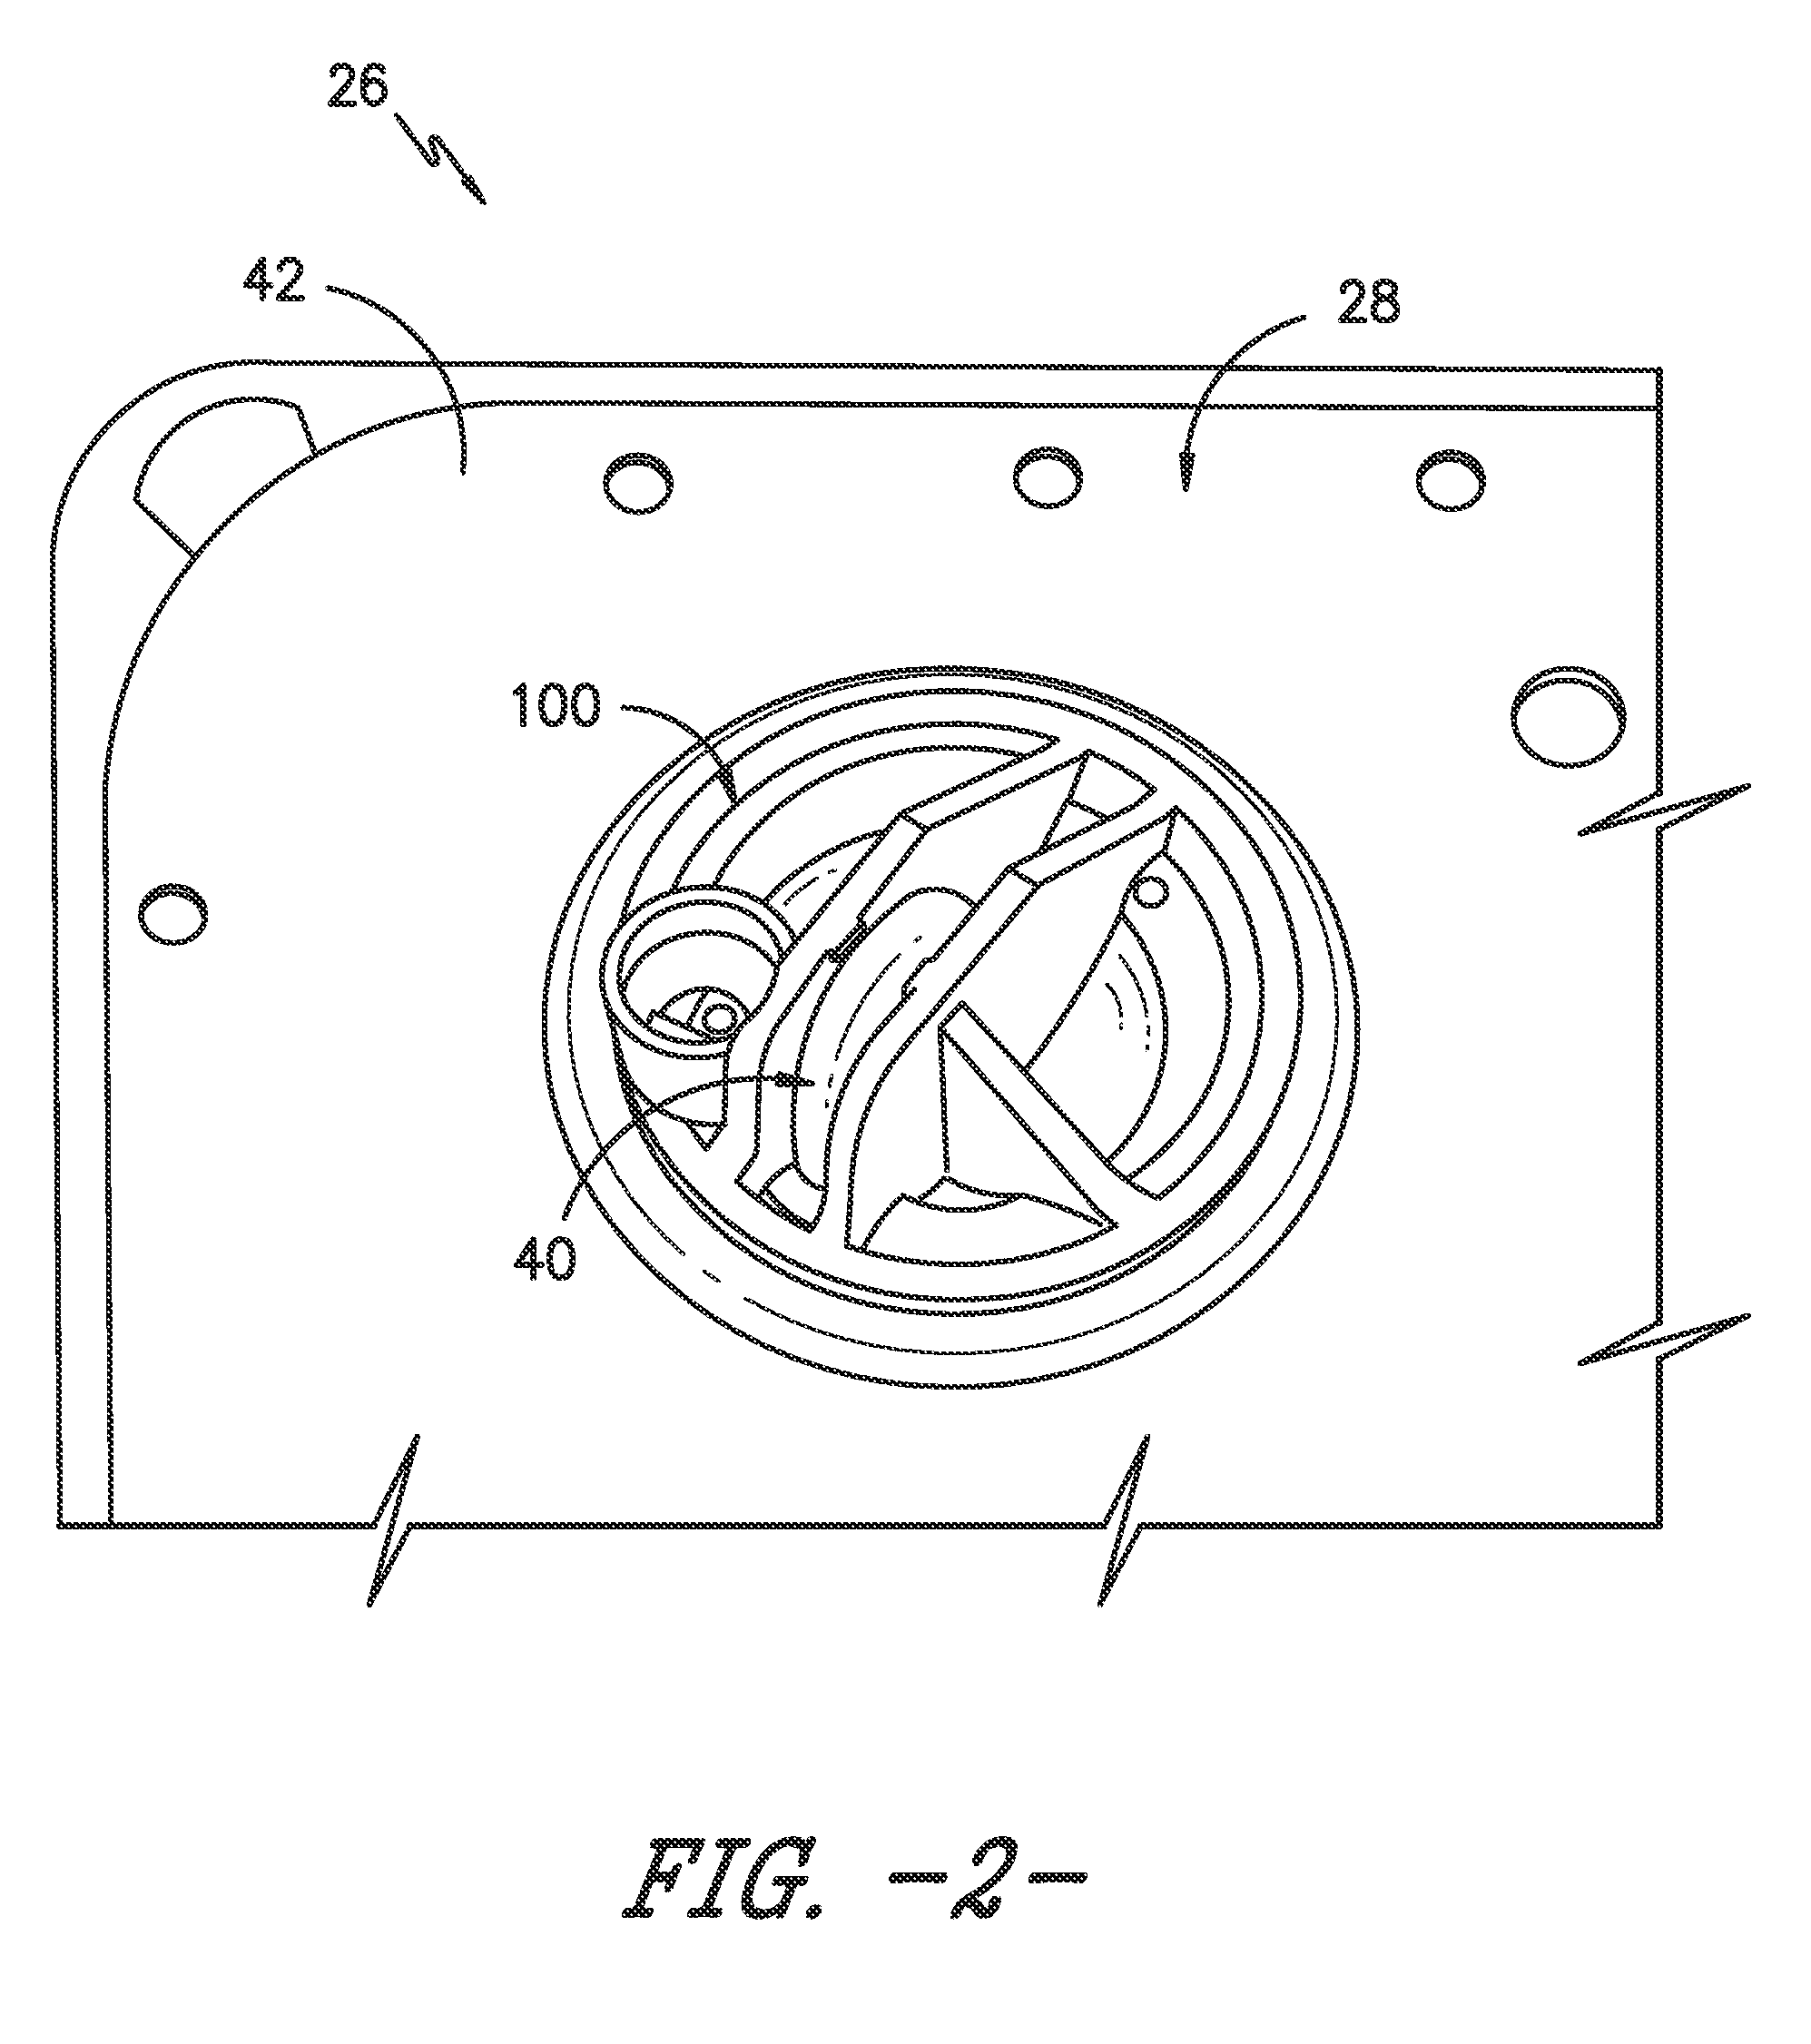 Ball joint for a washing machine suspension system